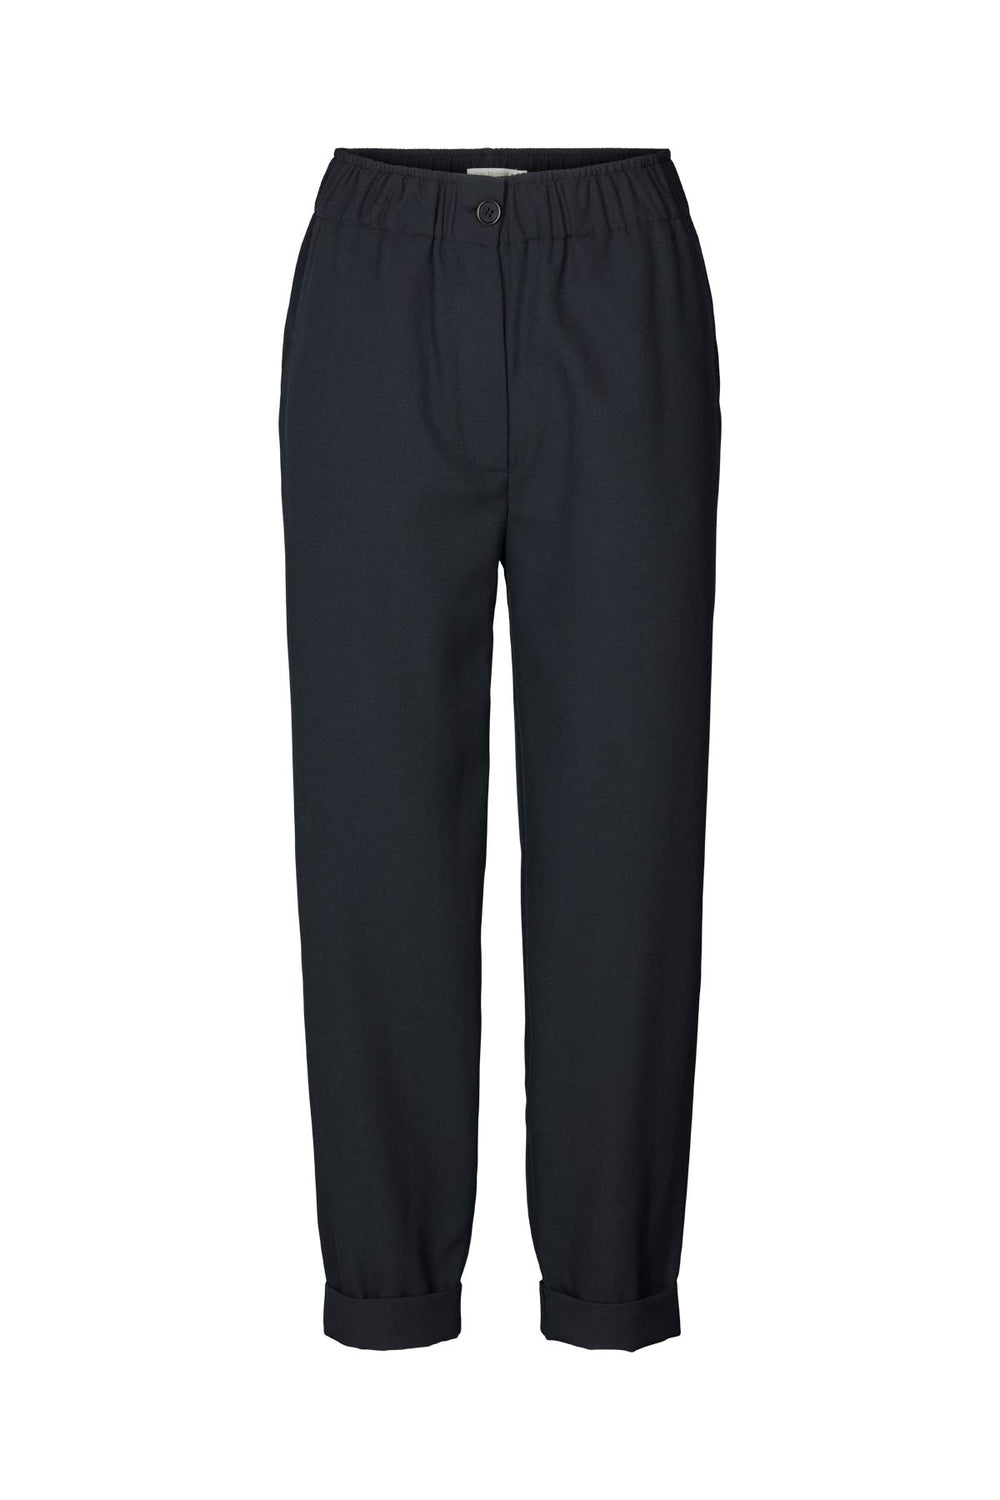 Francine Light Tailoring Casual Pants